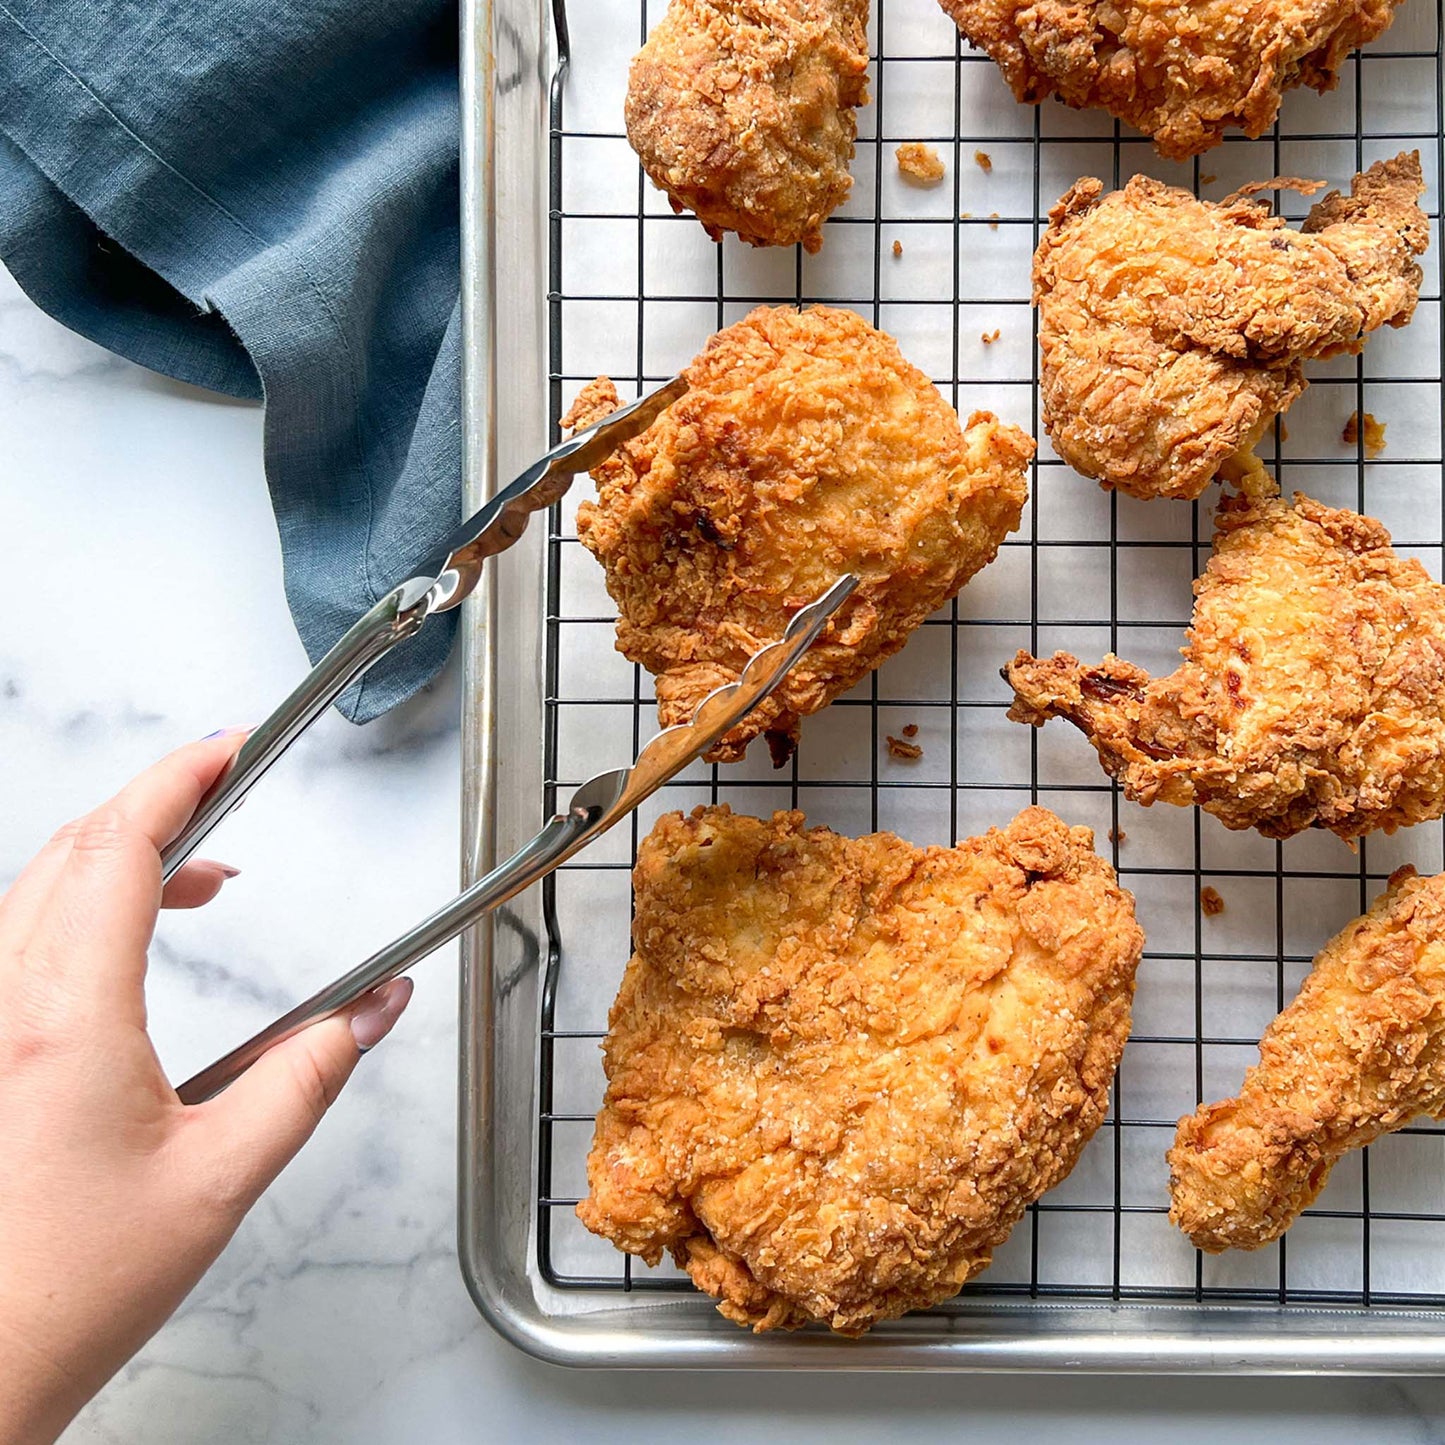 SOUTHERN FRIED CHICKEN FAMILY MEAL